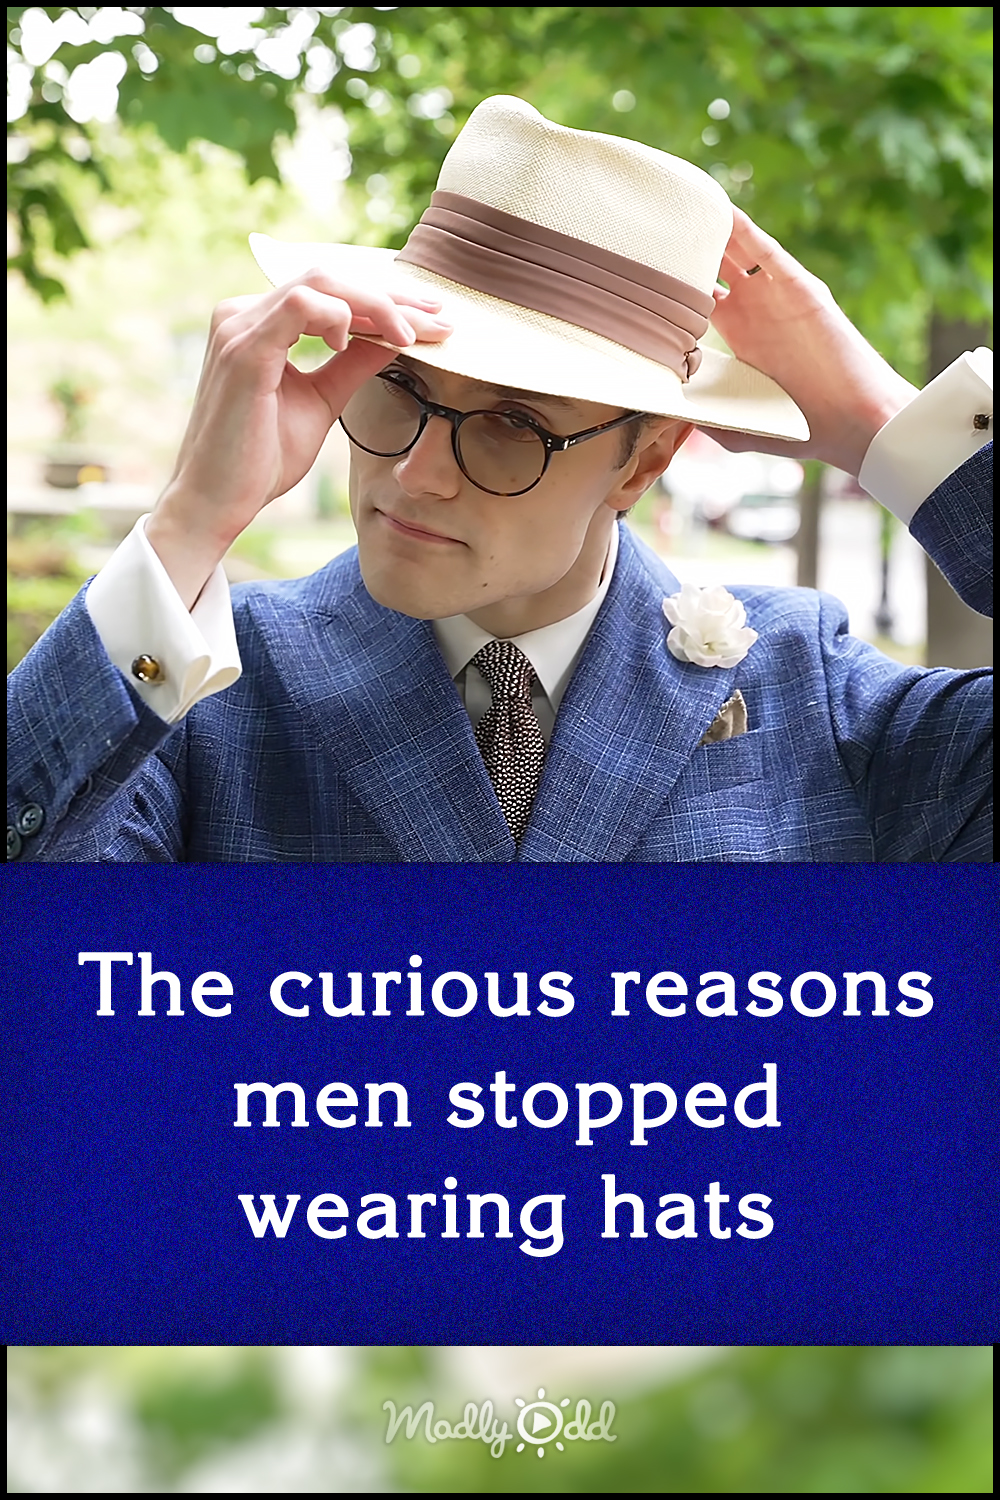 The curious reasons men stopped wearing hats